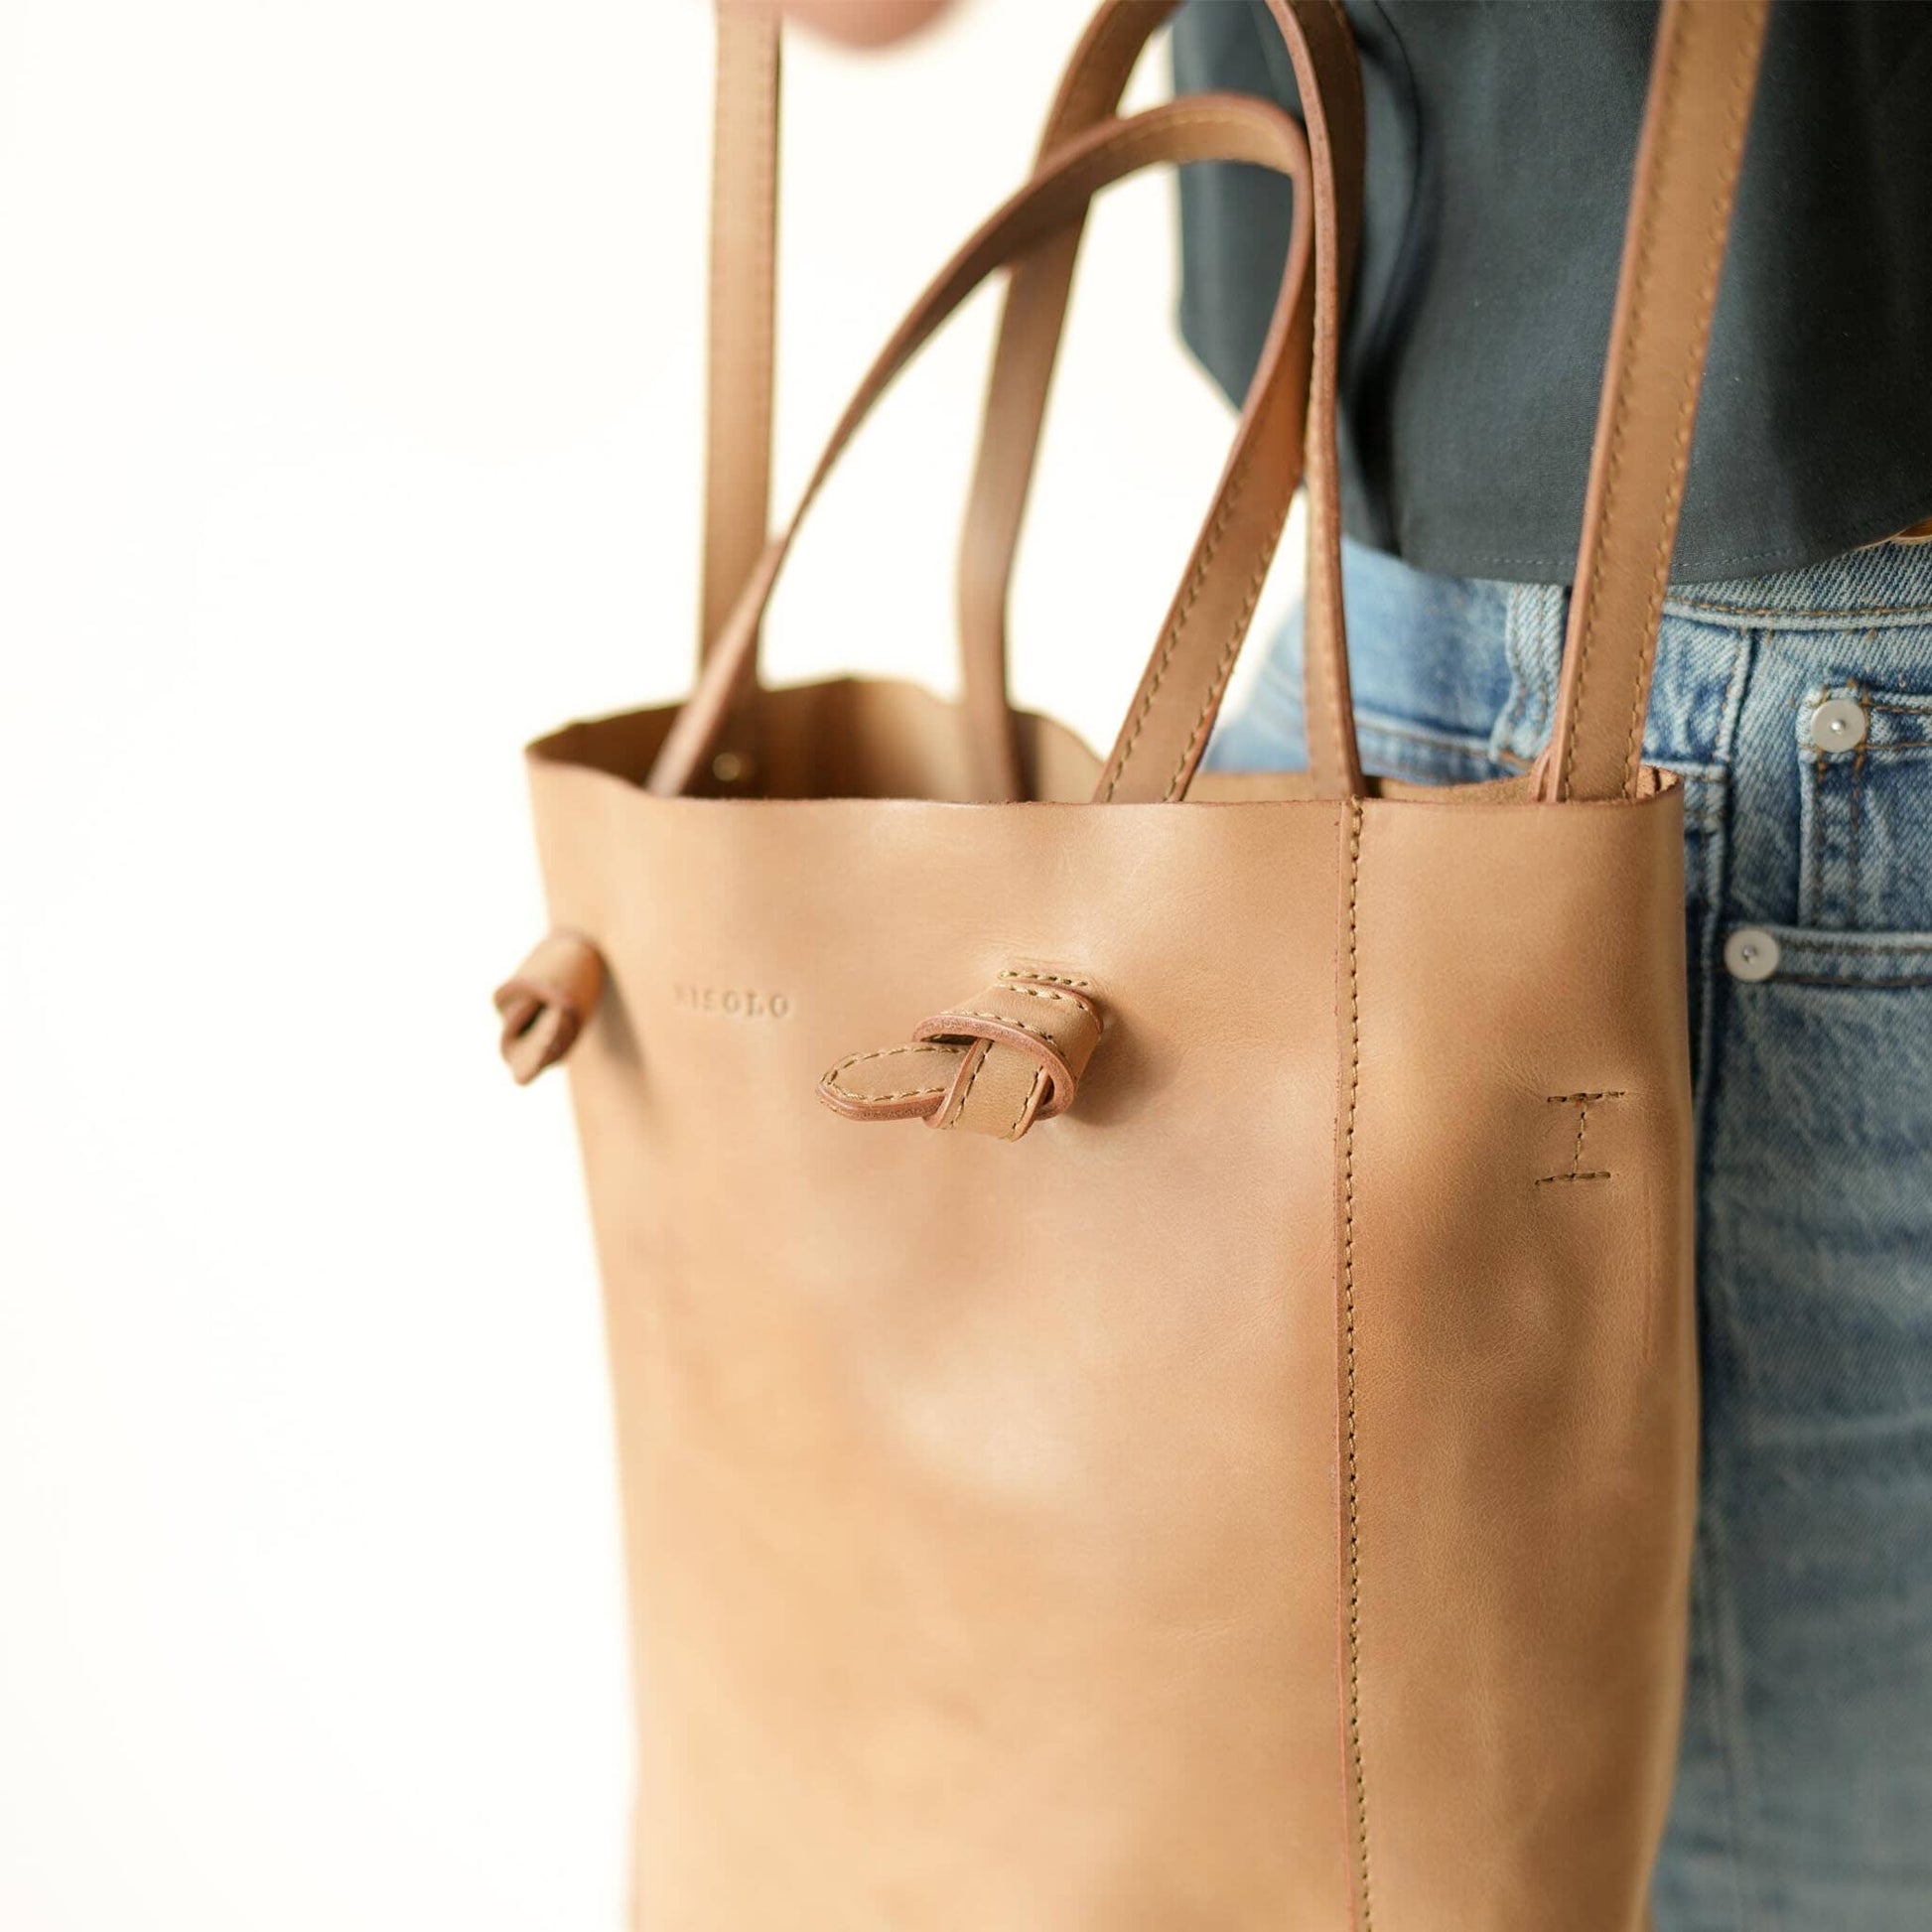 Nisolo Simone Convertible Shopper Bag - Dubbed “The Perfect Bag” because of its structure, shape, and size. Made to hold all the essentials for your day out of the house. Features removable and adjustable cross body strap to convert your handbag into an over the shoulder bag.